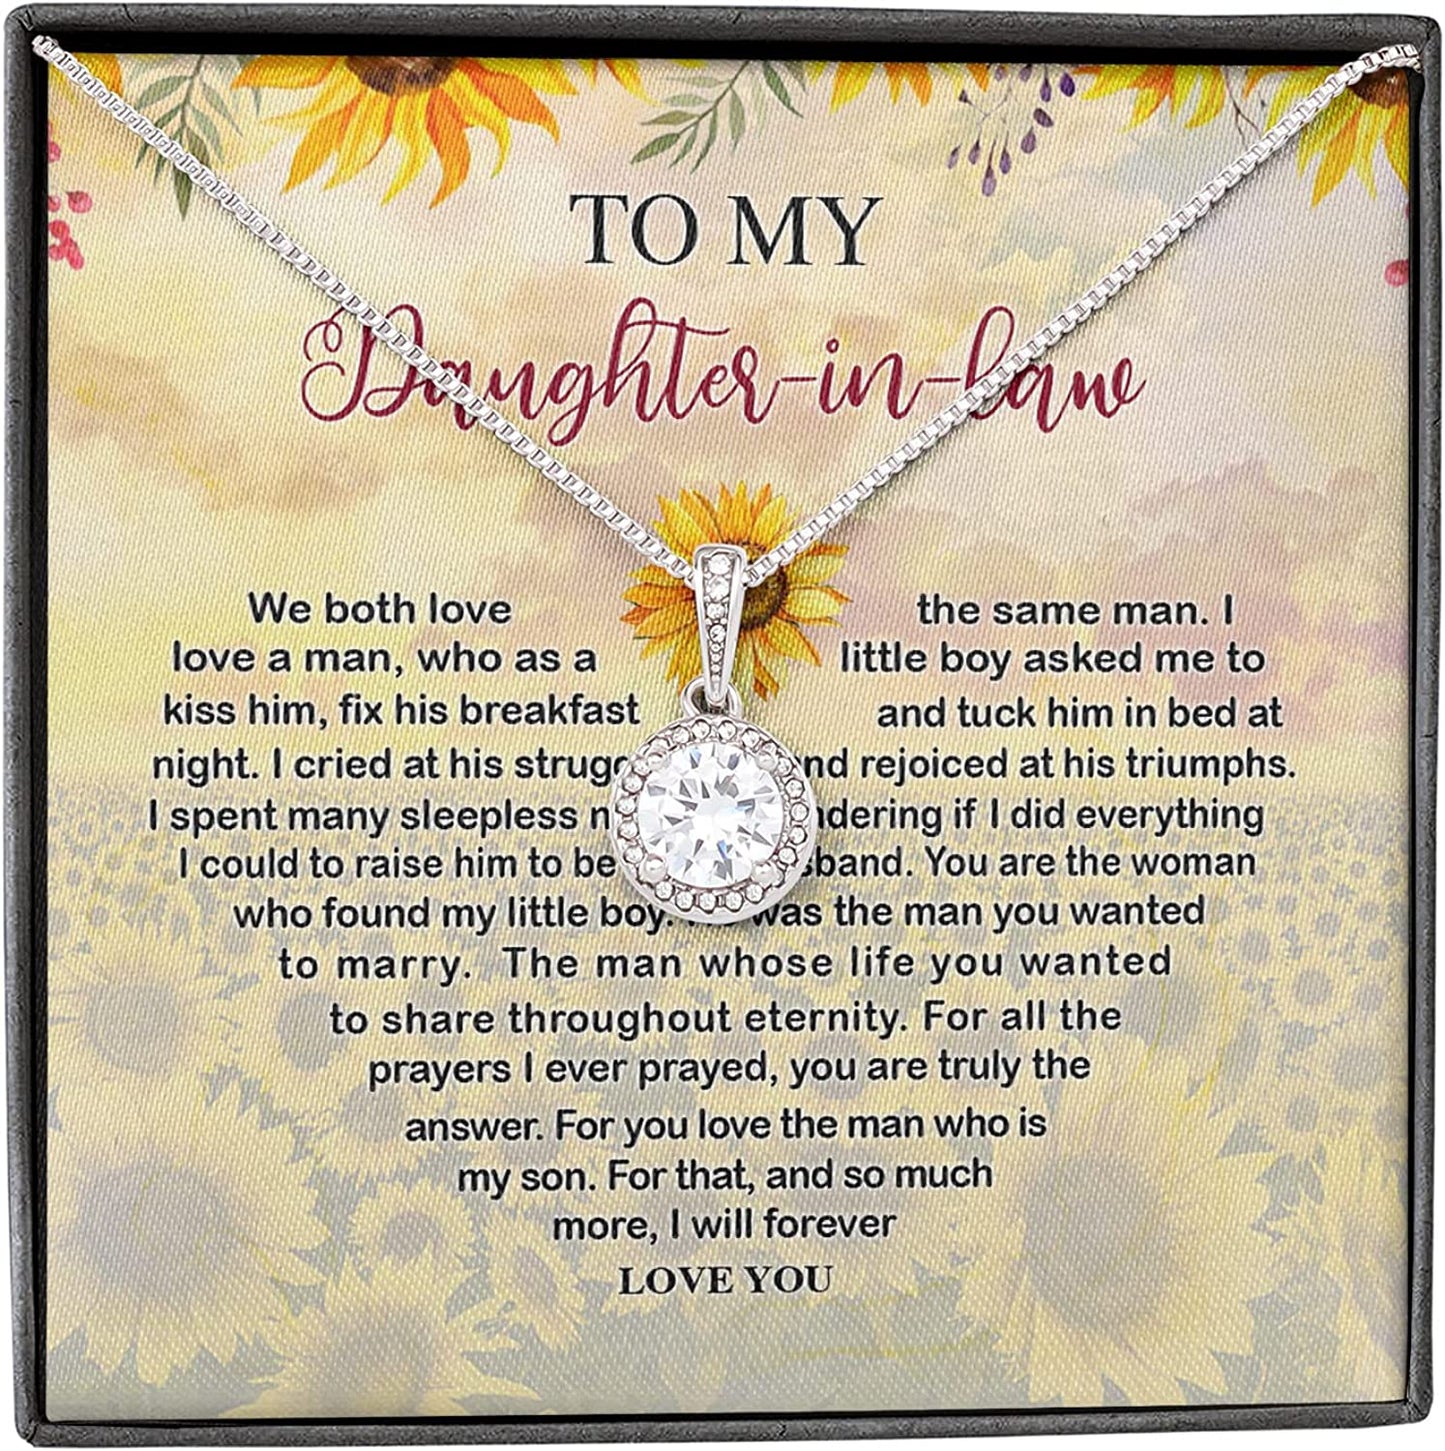 Daughter In Law Gift Ideas - To My Daughter In Law Necklace, Gifts For Daughter In Law From Mother In Law On Wedding Day, Birthday, Mothers Day, Christmas, Jewelry Gifts For Future Daughter In Law